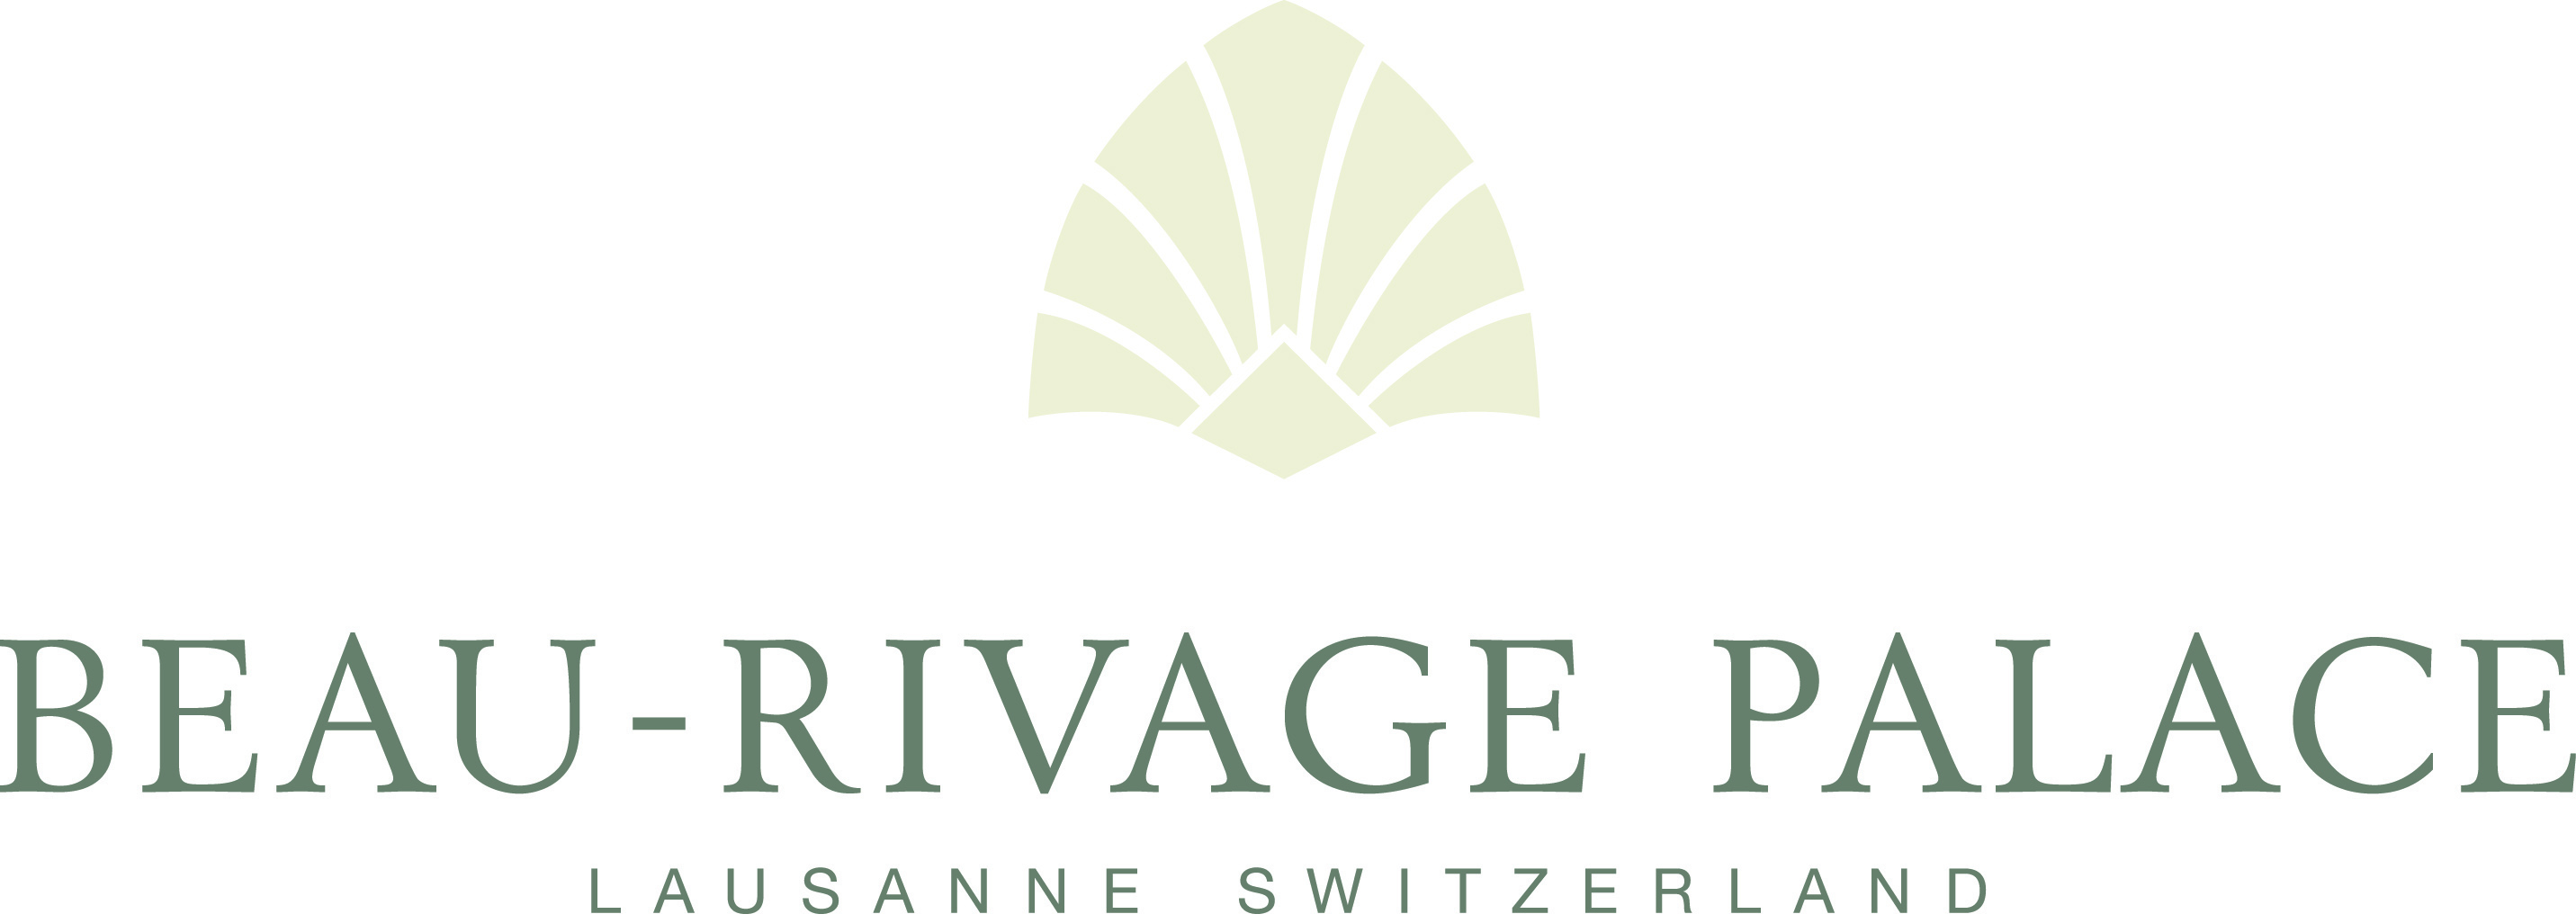 Image result for Beau-Rivage Palace Hotel Lausanne